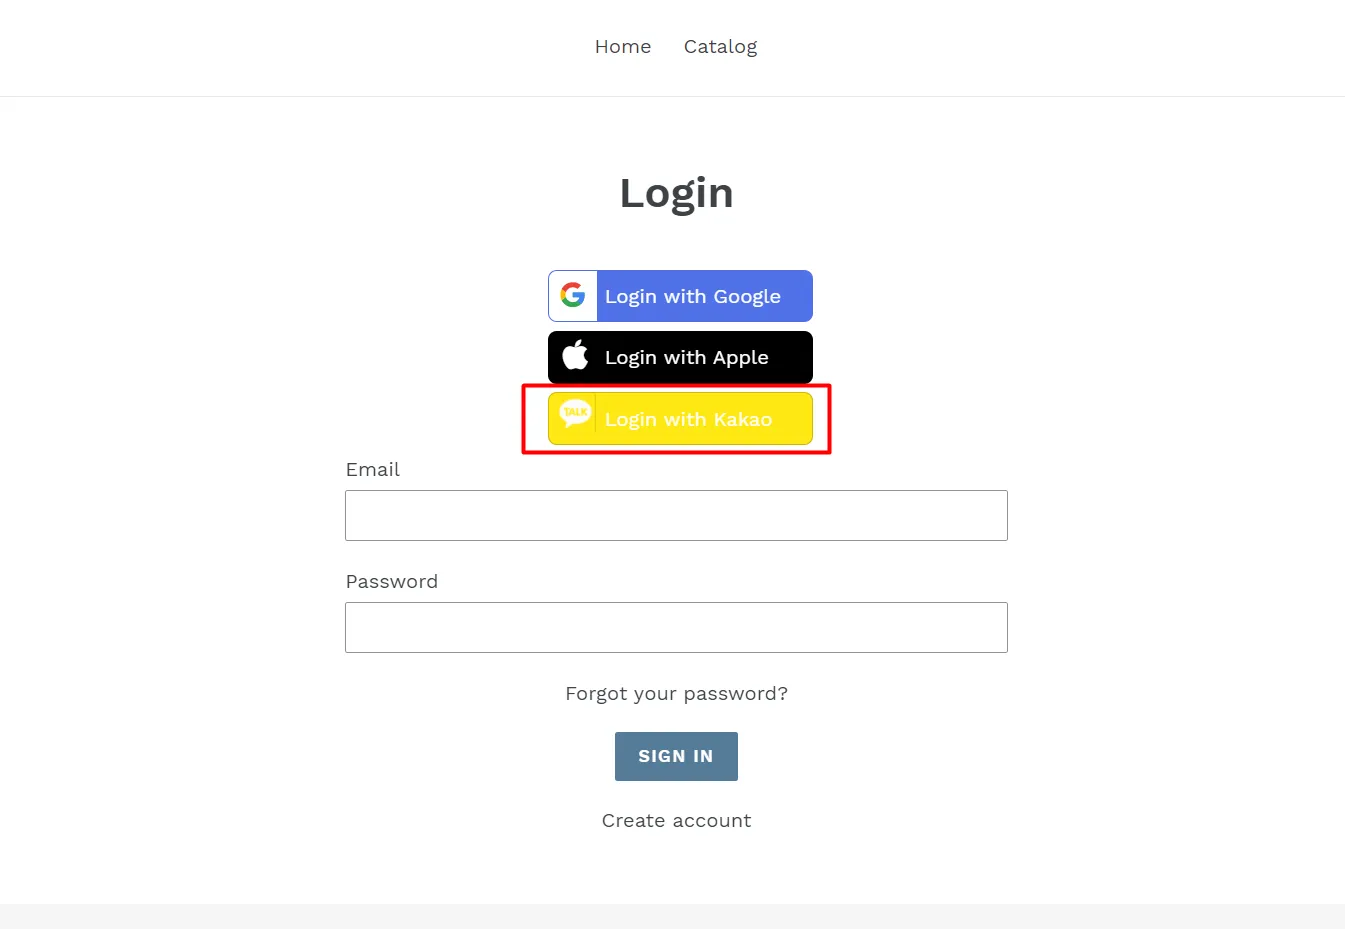 kakao talk login on shopify has been enabled